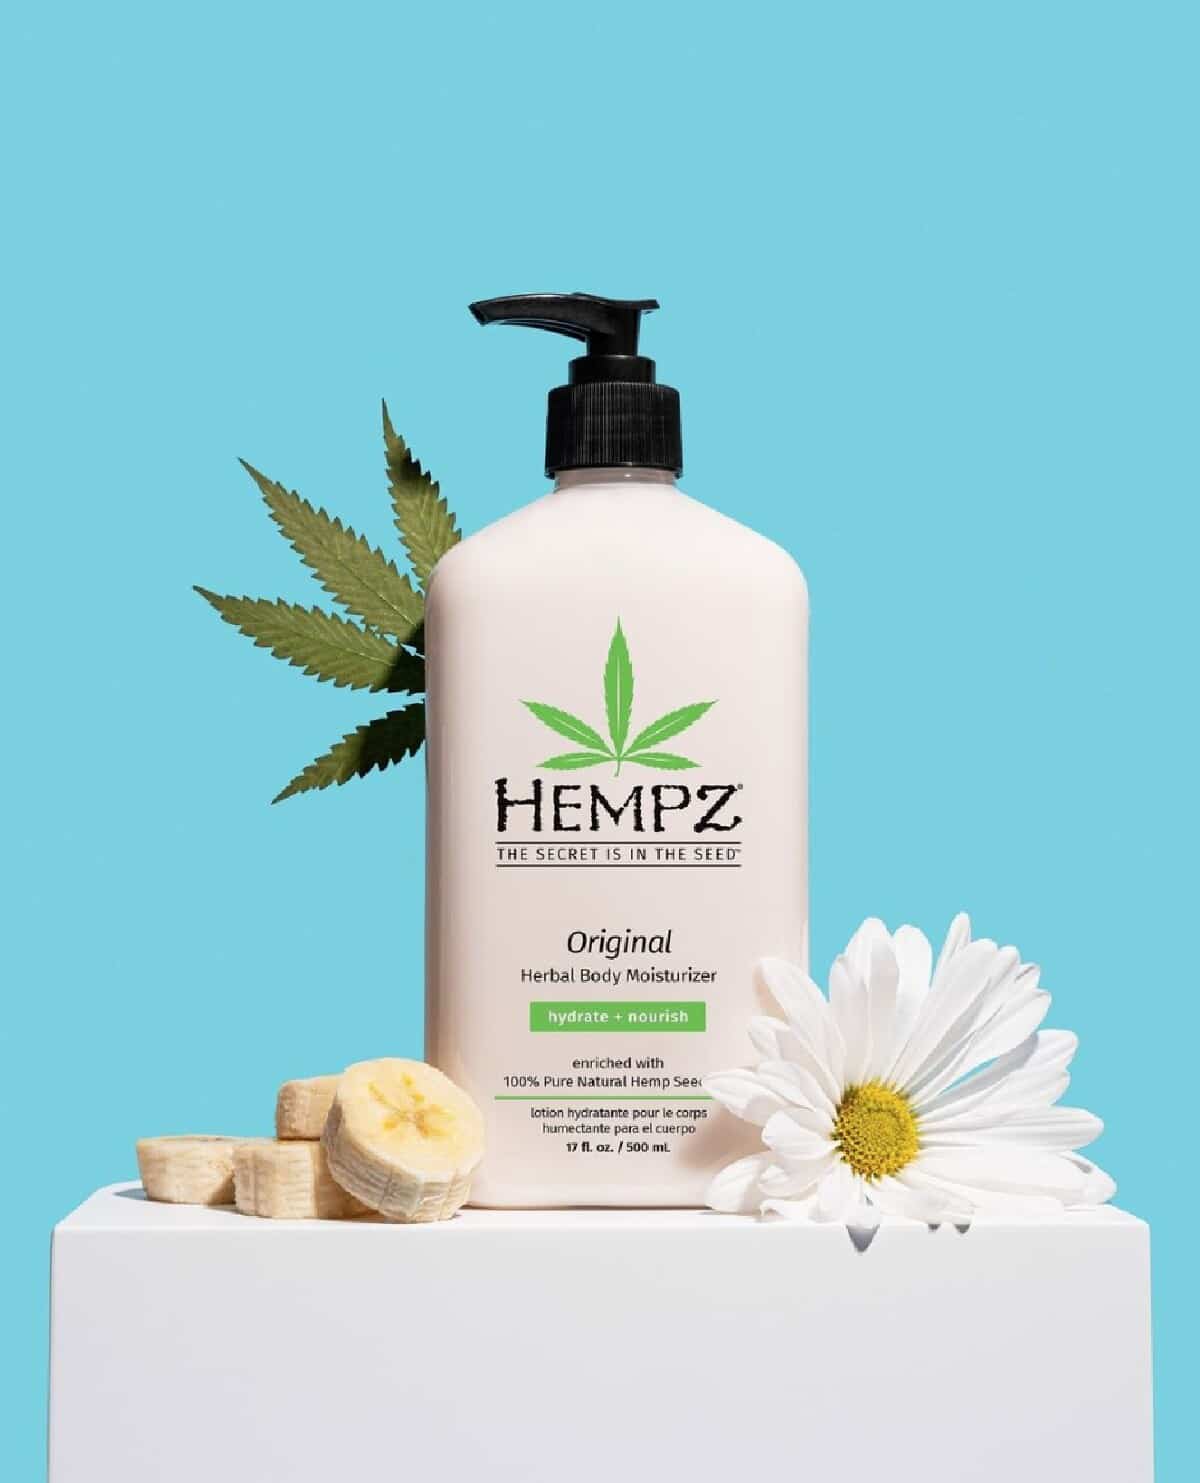 A white bottle of Hempz body lotion with a black pump top on top a white box decorated with bananas, daisies, and a hemp leaf on a blue background. 